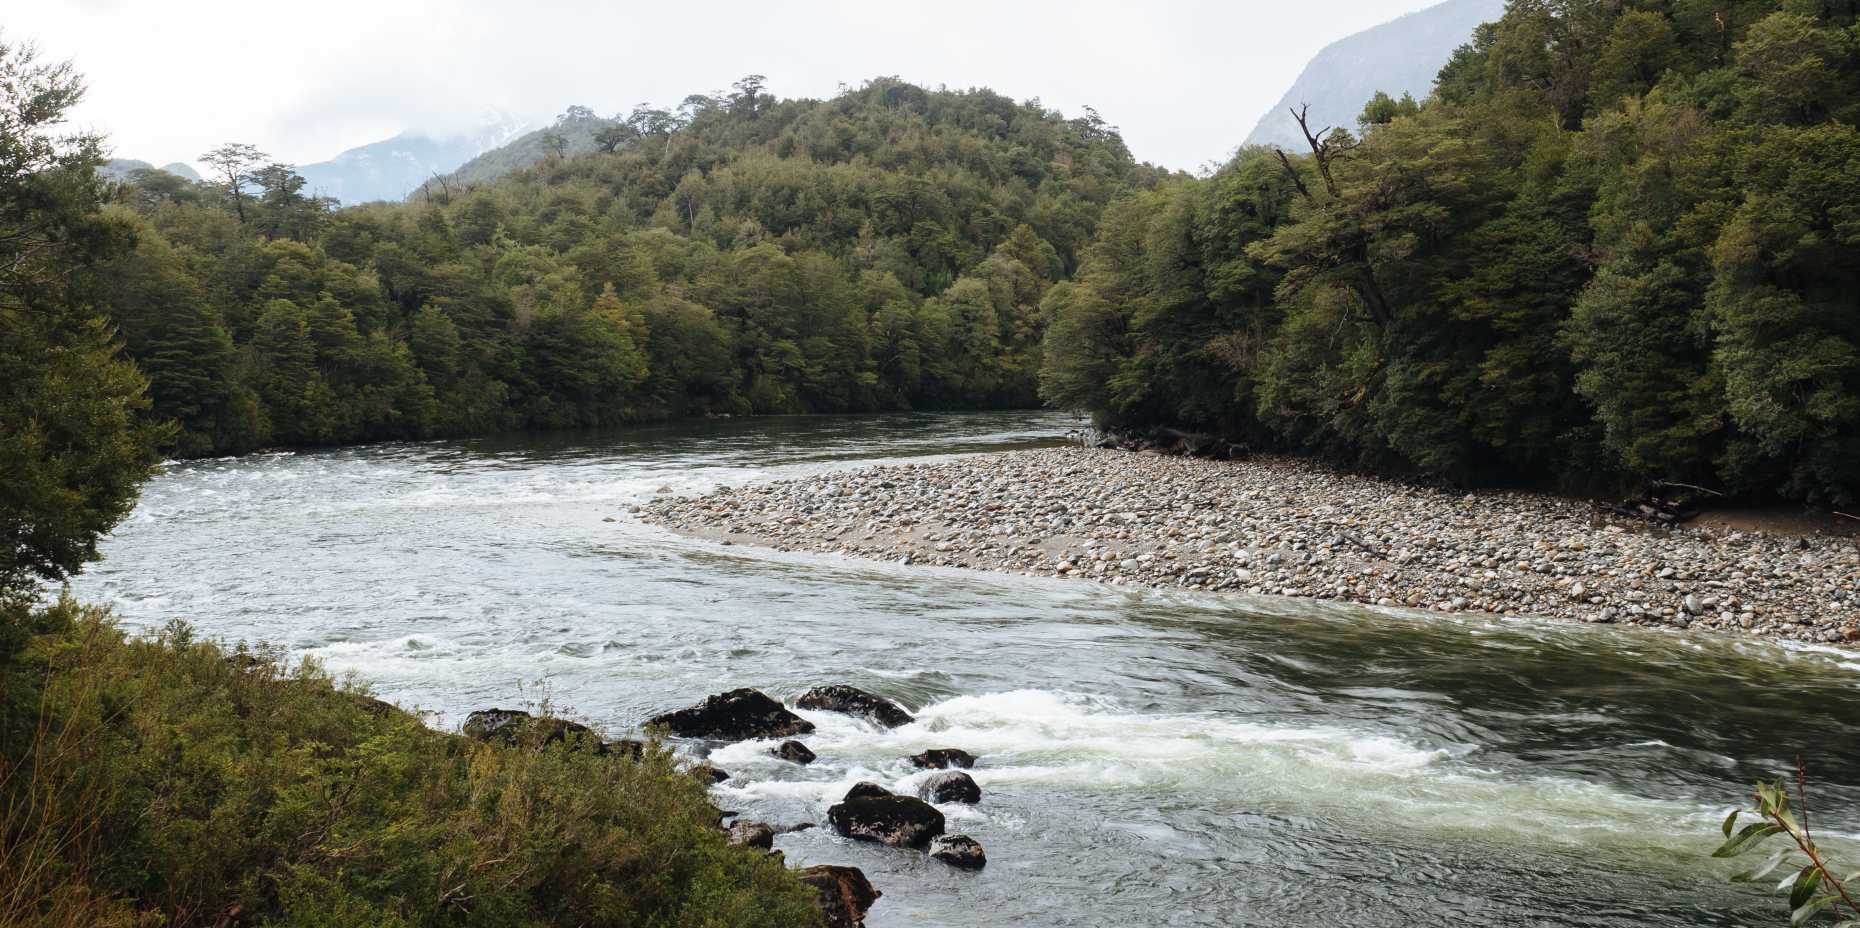 Enlarged view: River in Chile